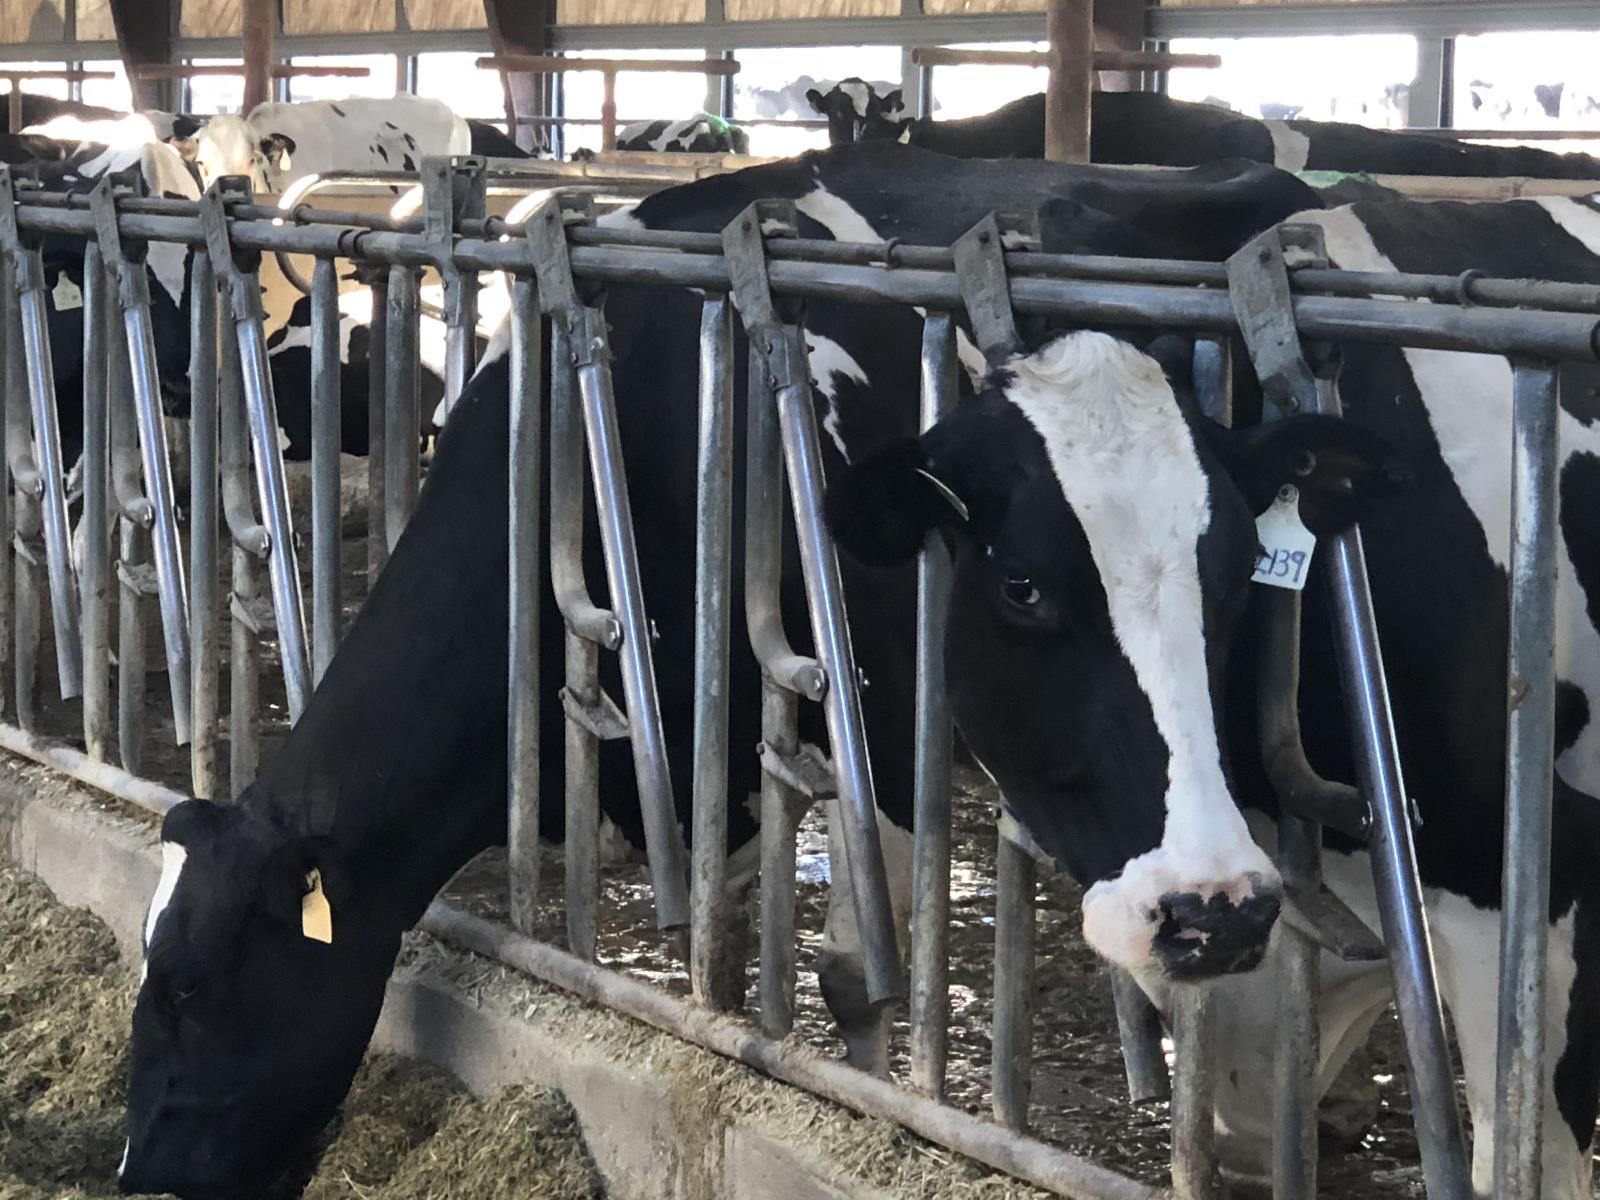 Led by sales of dairy products abroad, the total value of Idaho farm product exports rose 6 percent during the first six months of 2020.